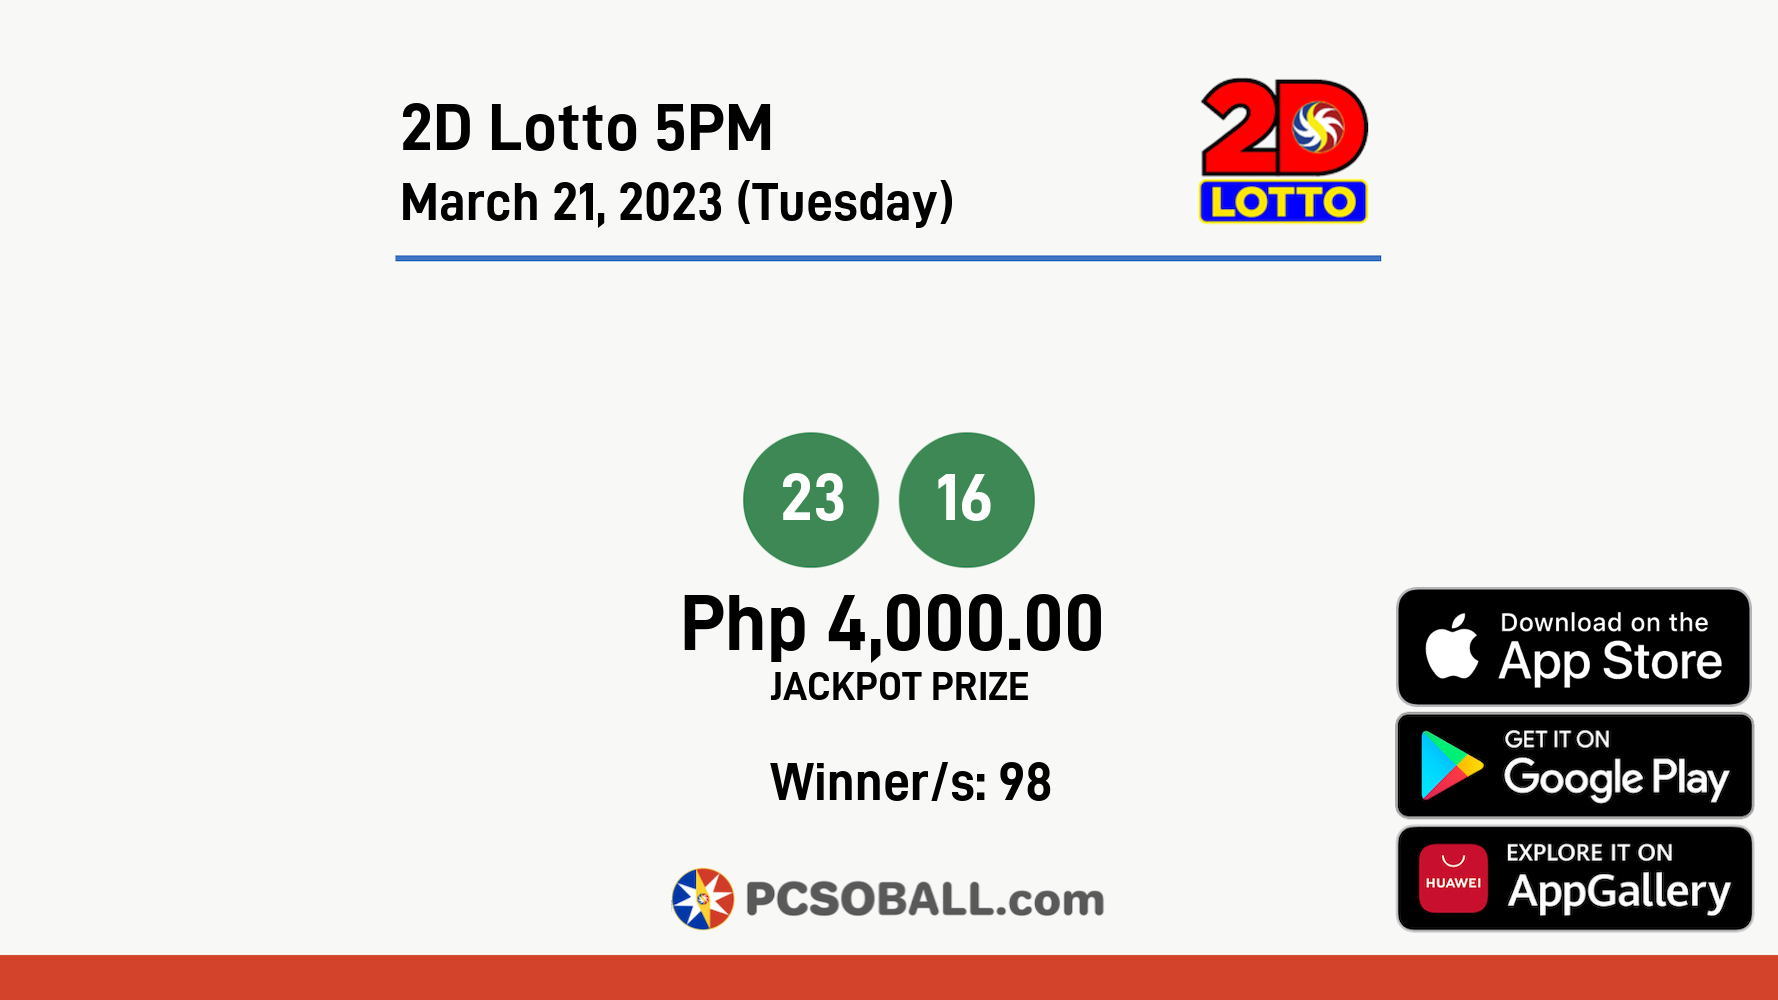 2D Lotto 5PM March 21, 2023 (Tuesday) Result